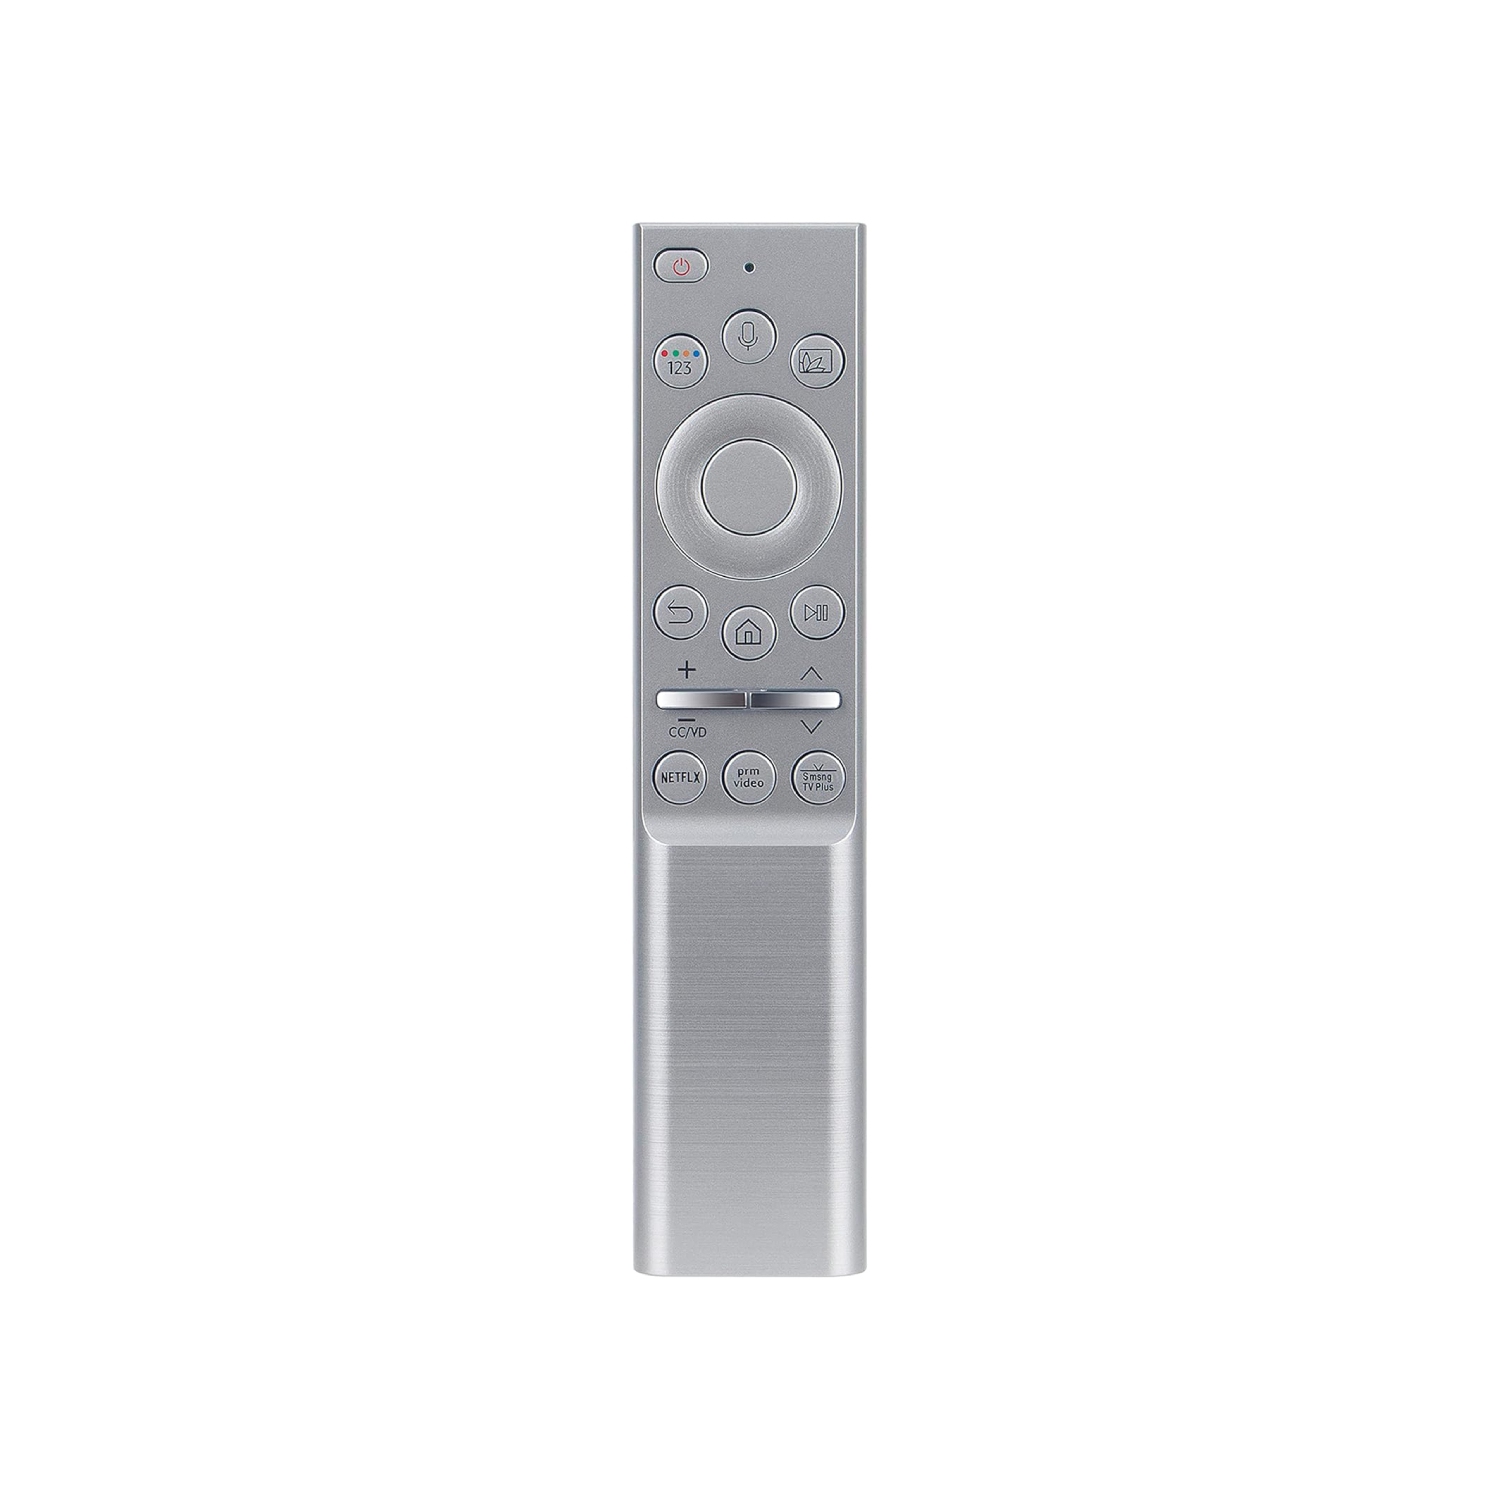 Refurbished (Good) Samsung BN59-01327A Replace Smart Remote Control fit for Samsung Smart QLED TV